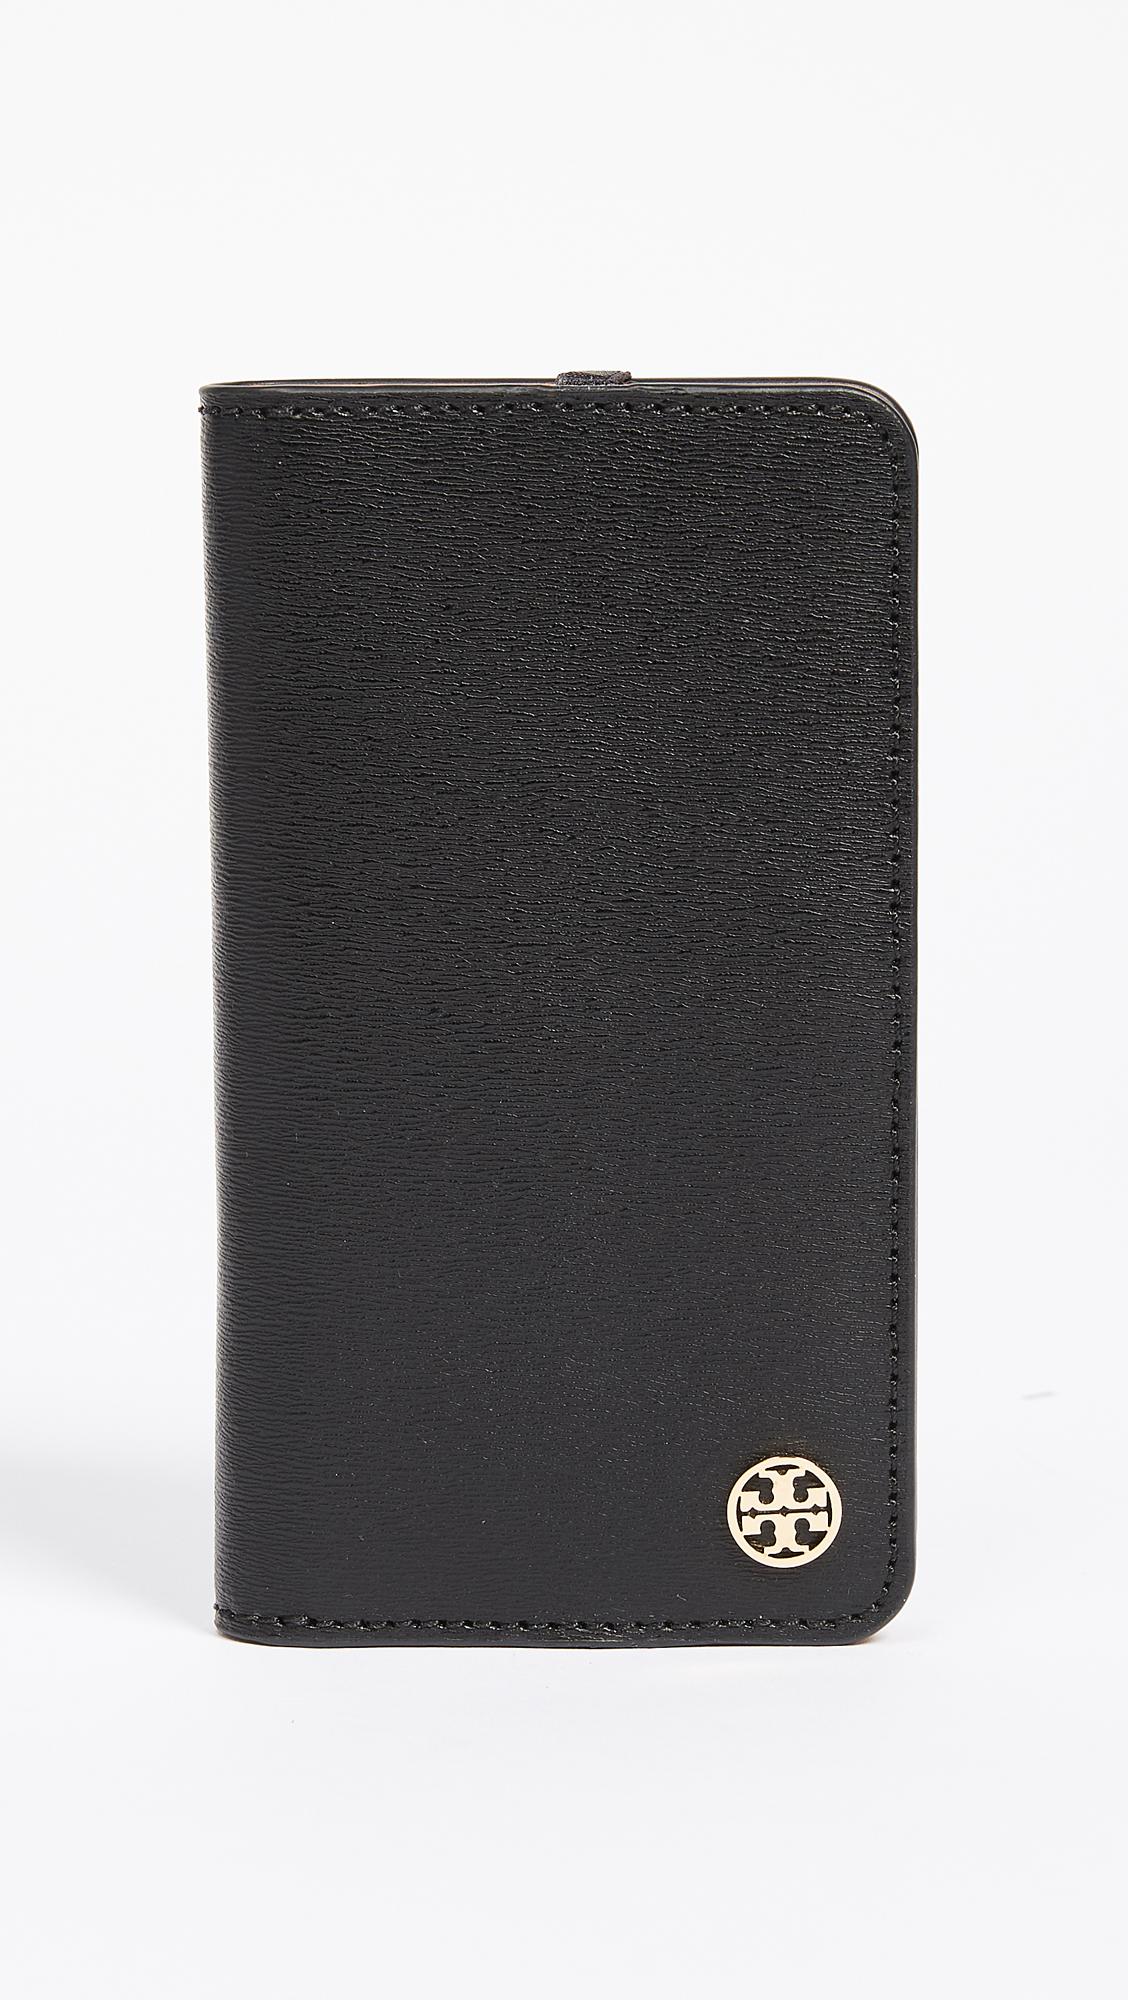 Tory Burch Parker Leather Folio Iphone 7 Case in Black | Lyst